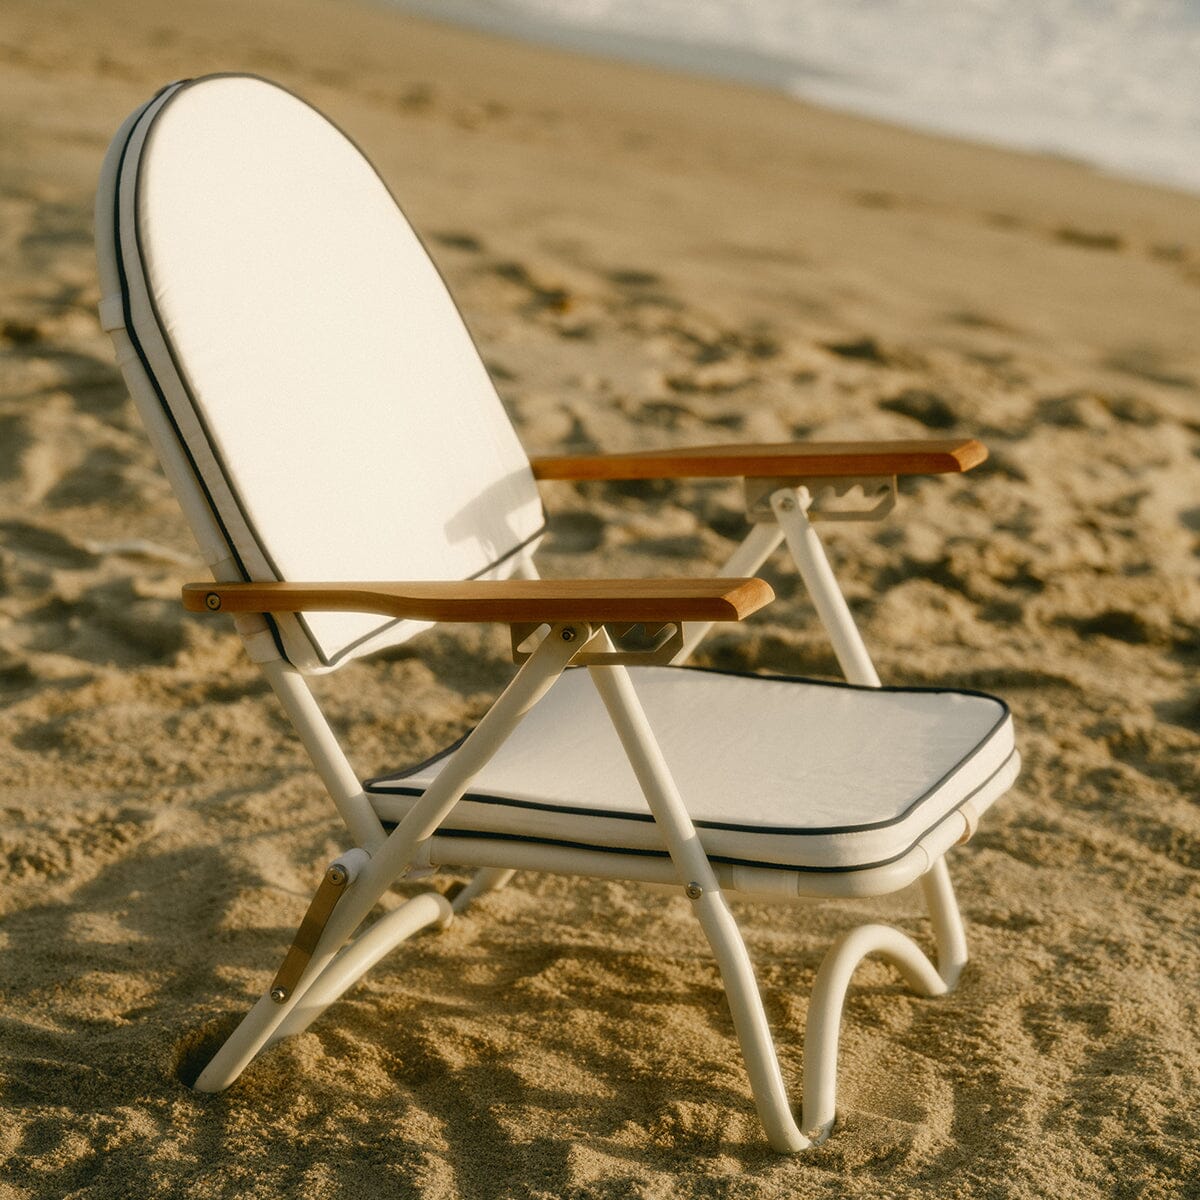 The Pam Chair - Rivie White Pam Chair Business & Pleasure Co 